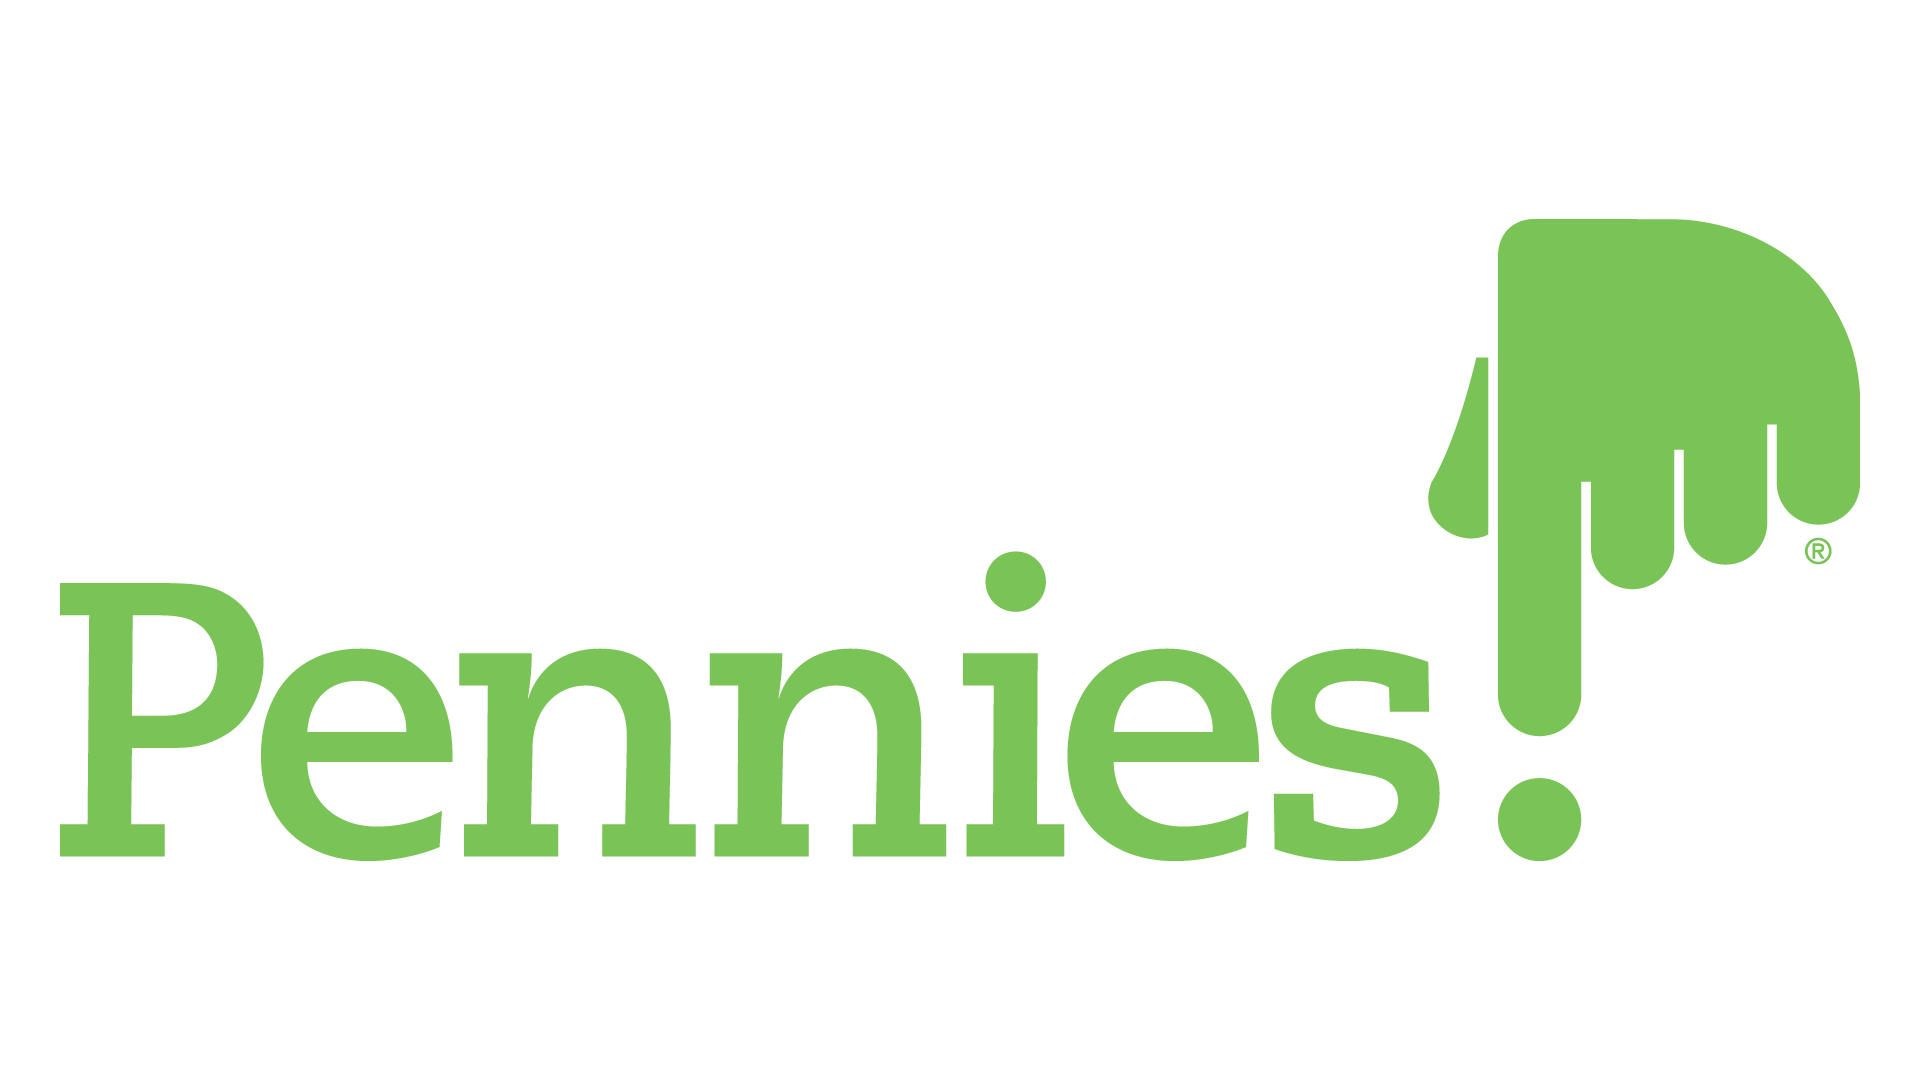 Pennies logo in green on white background